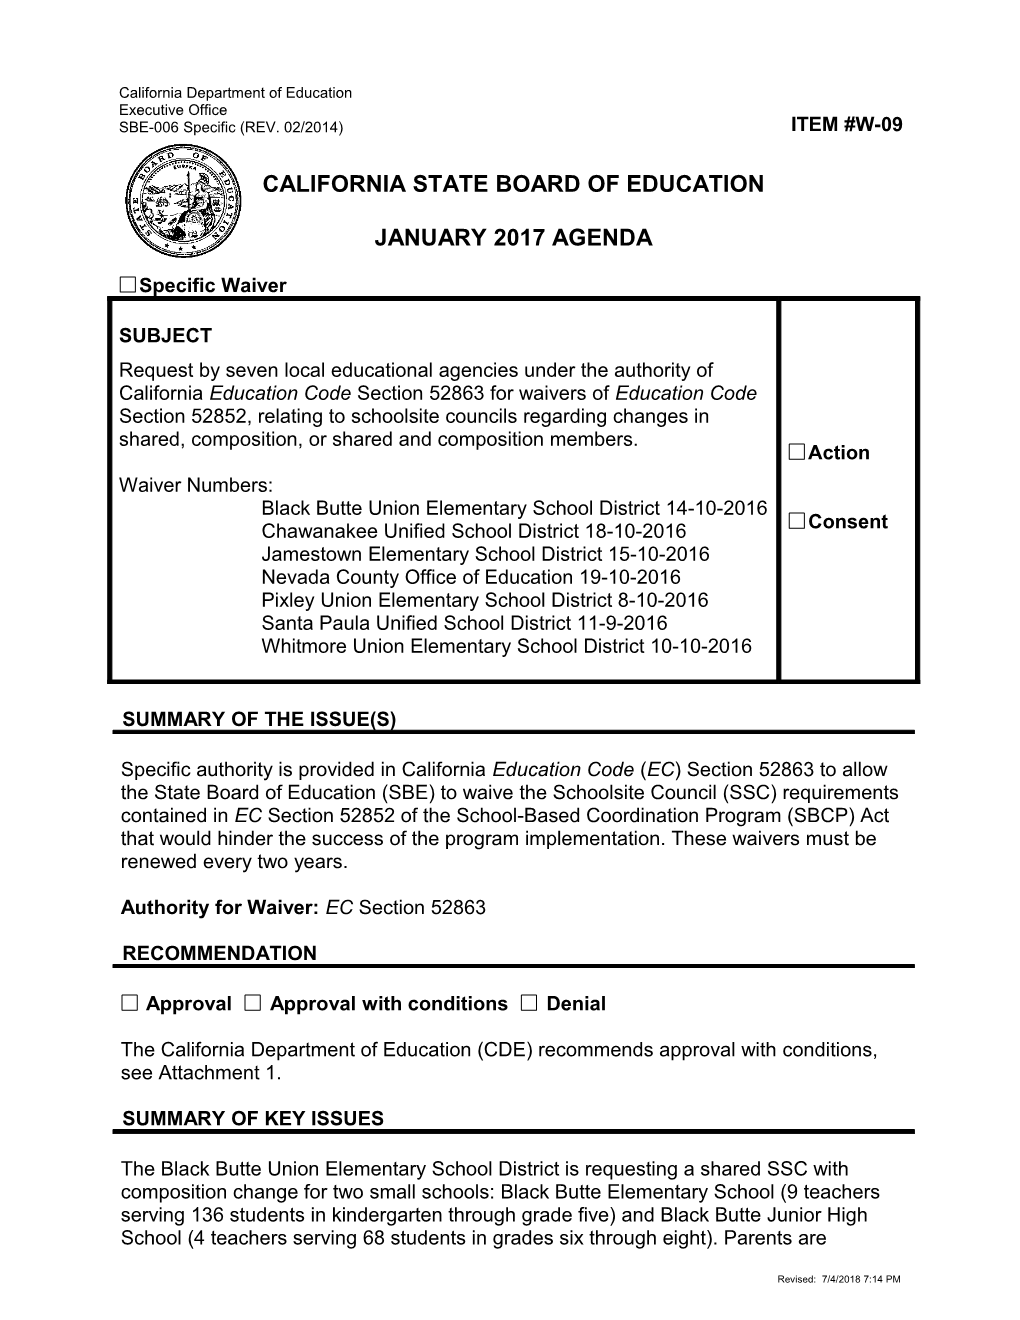 January 2017 Waiver Item W-09 - Meeting Agendas (CA State Board of Education)